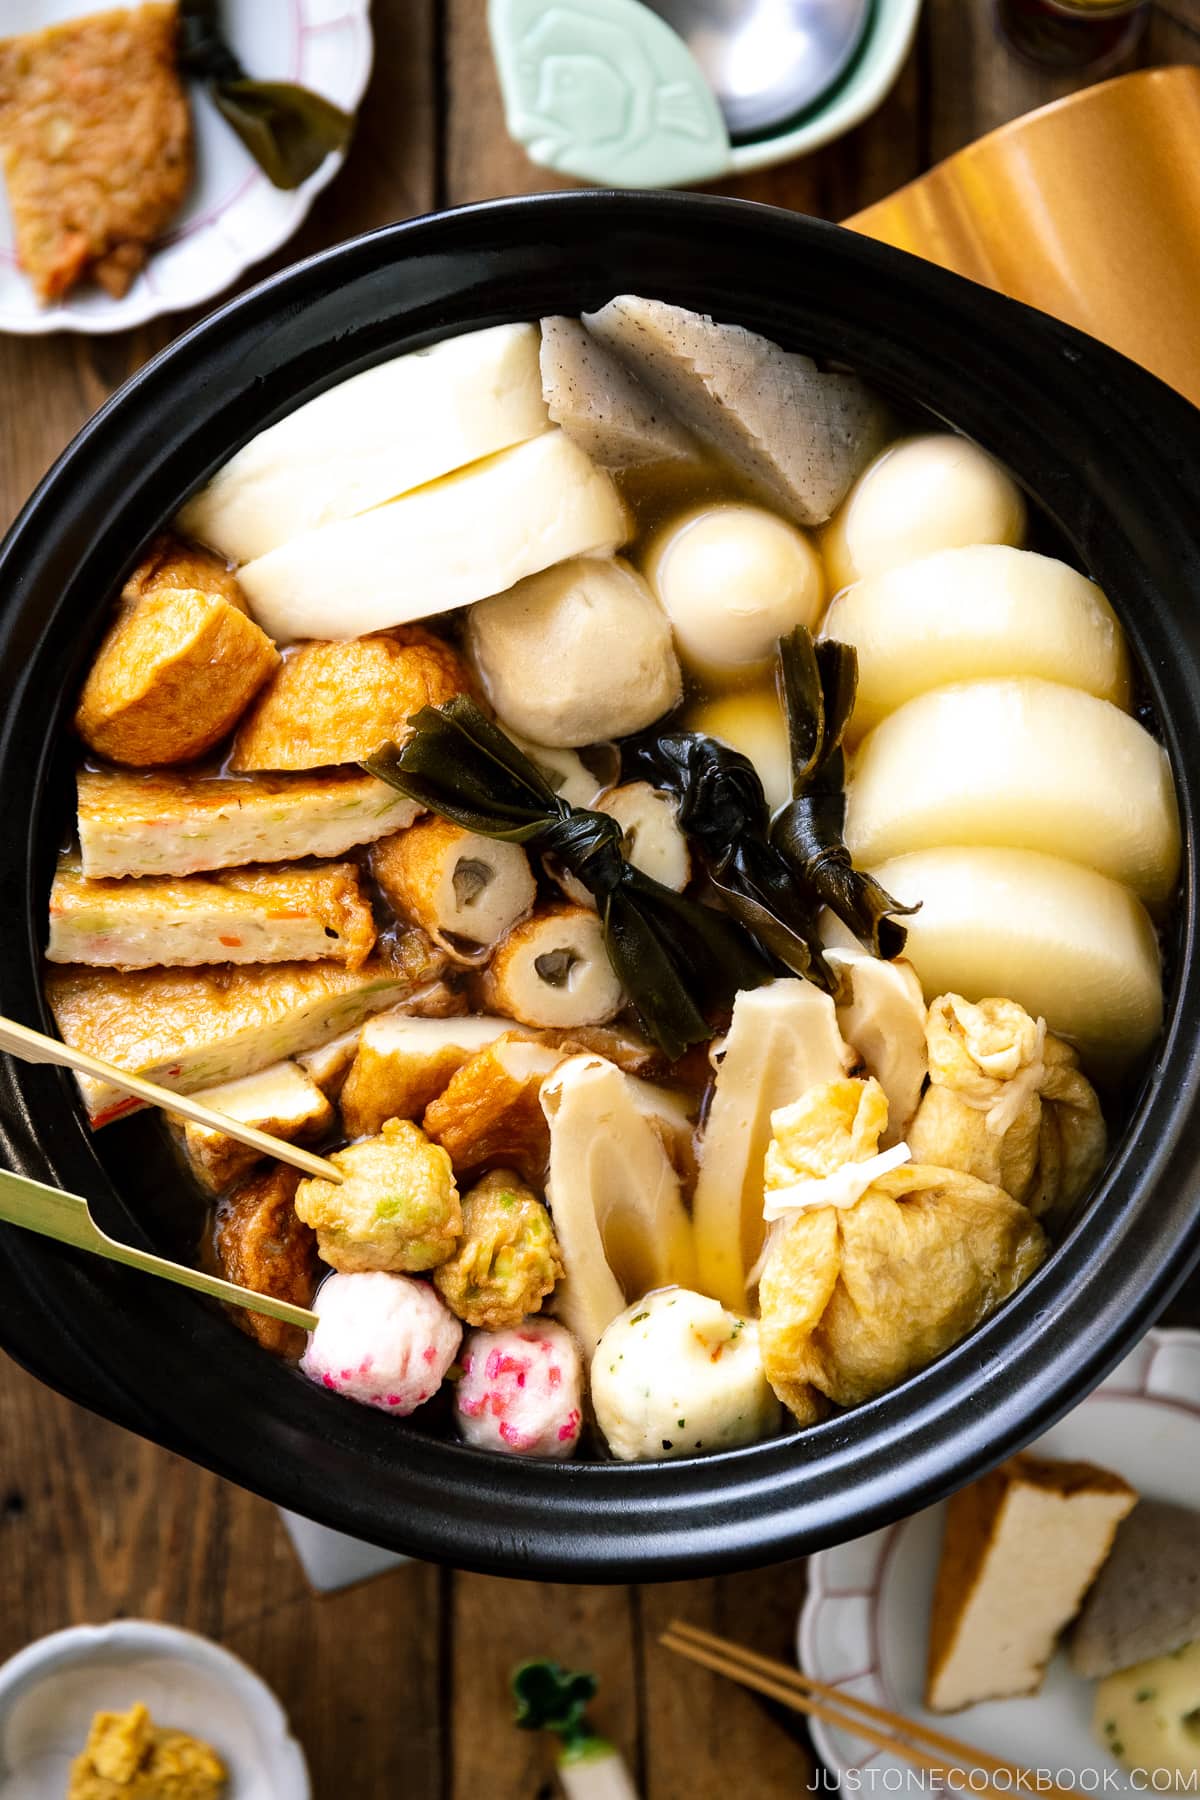 A donabe clay pot containing Japanese fish cake stew called oden, an assortment of fish balls and fish cakes.